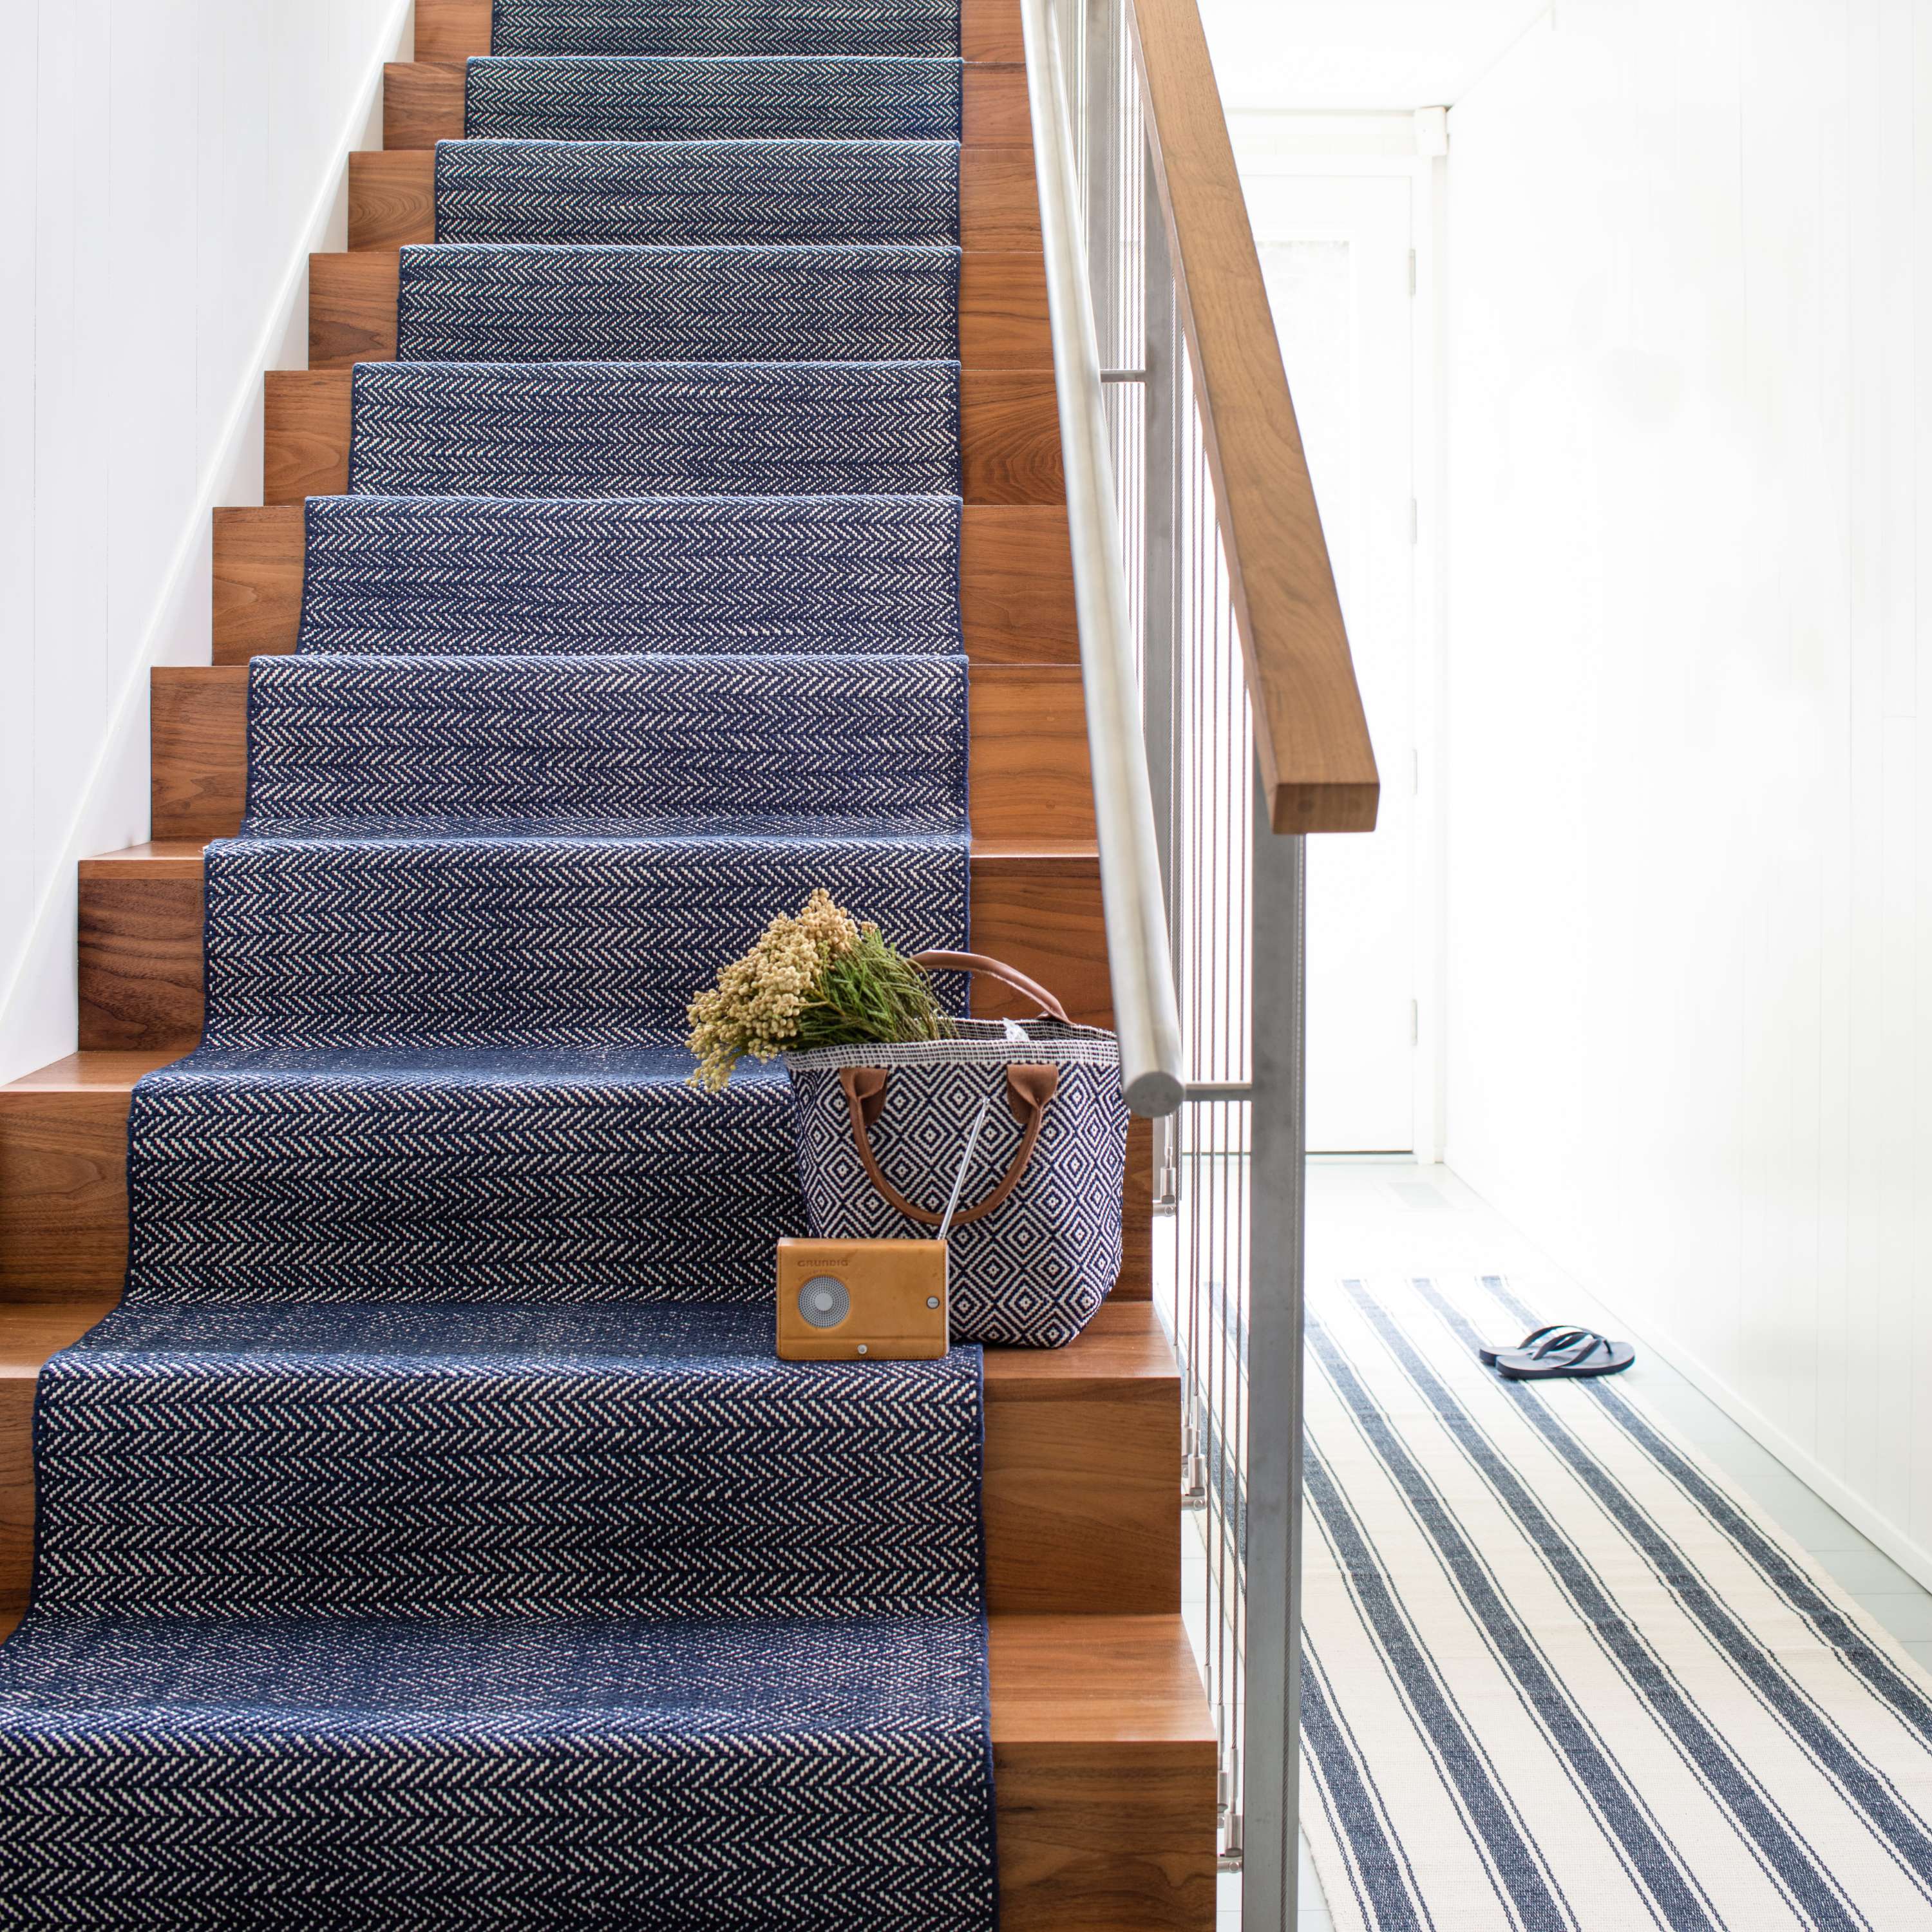 How To Choose A Stair Runner Rug